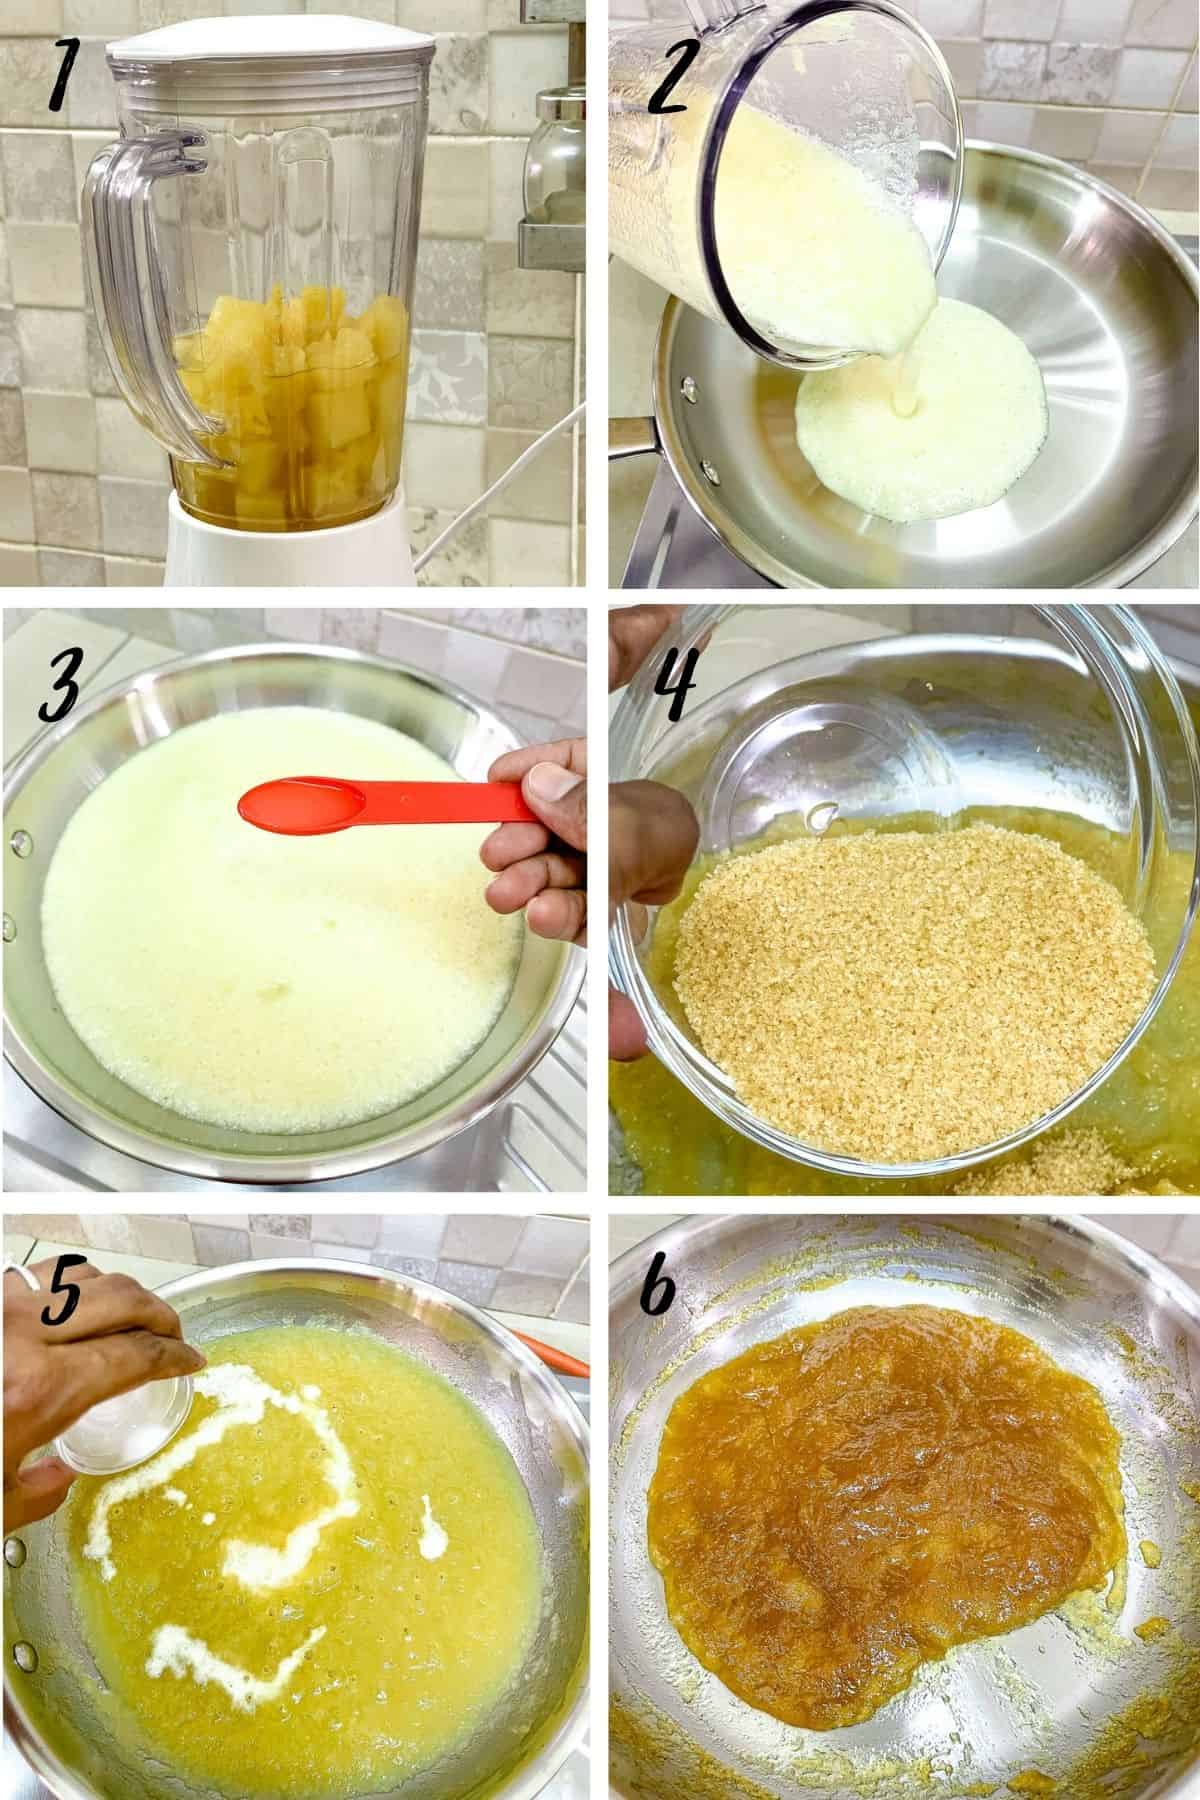 A poster of 6 images showing how to make filling.